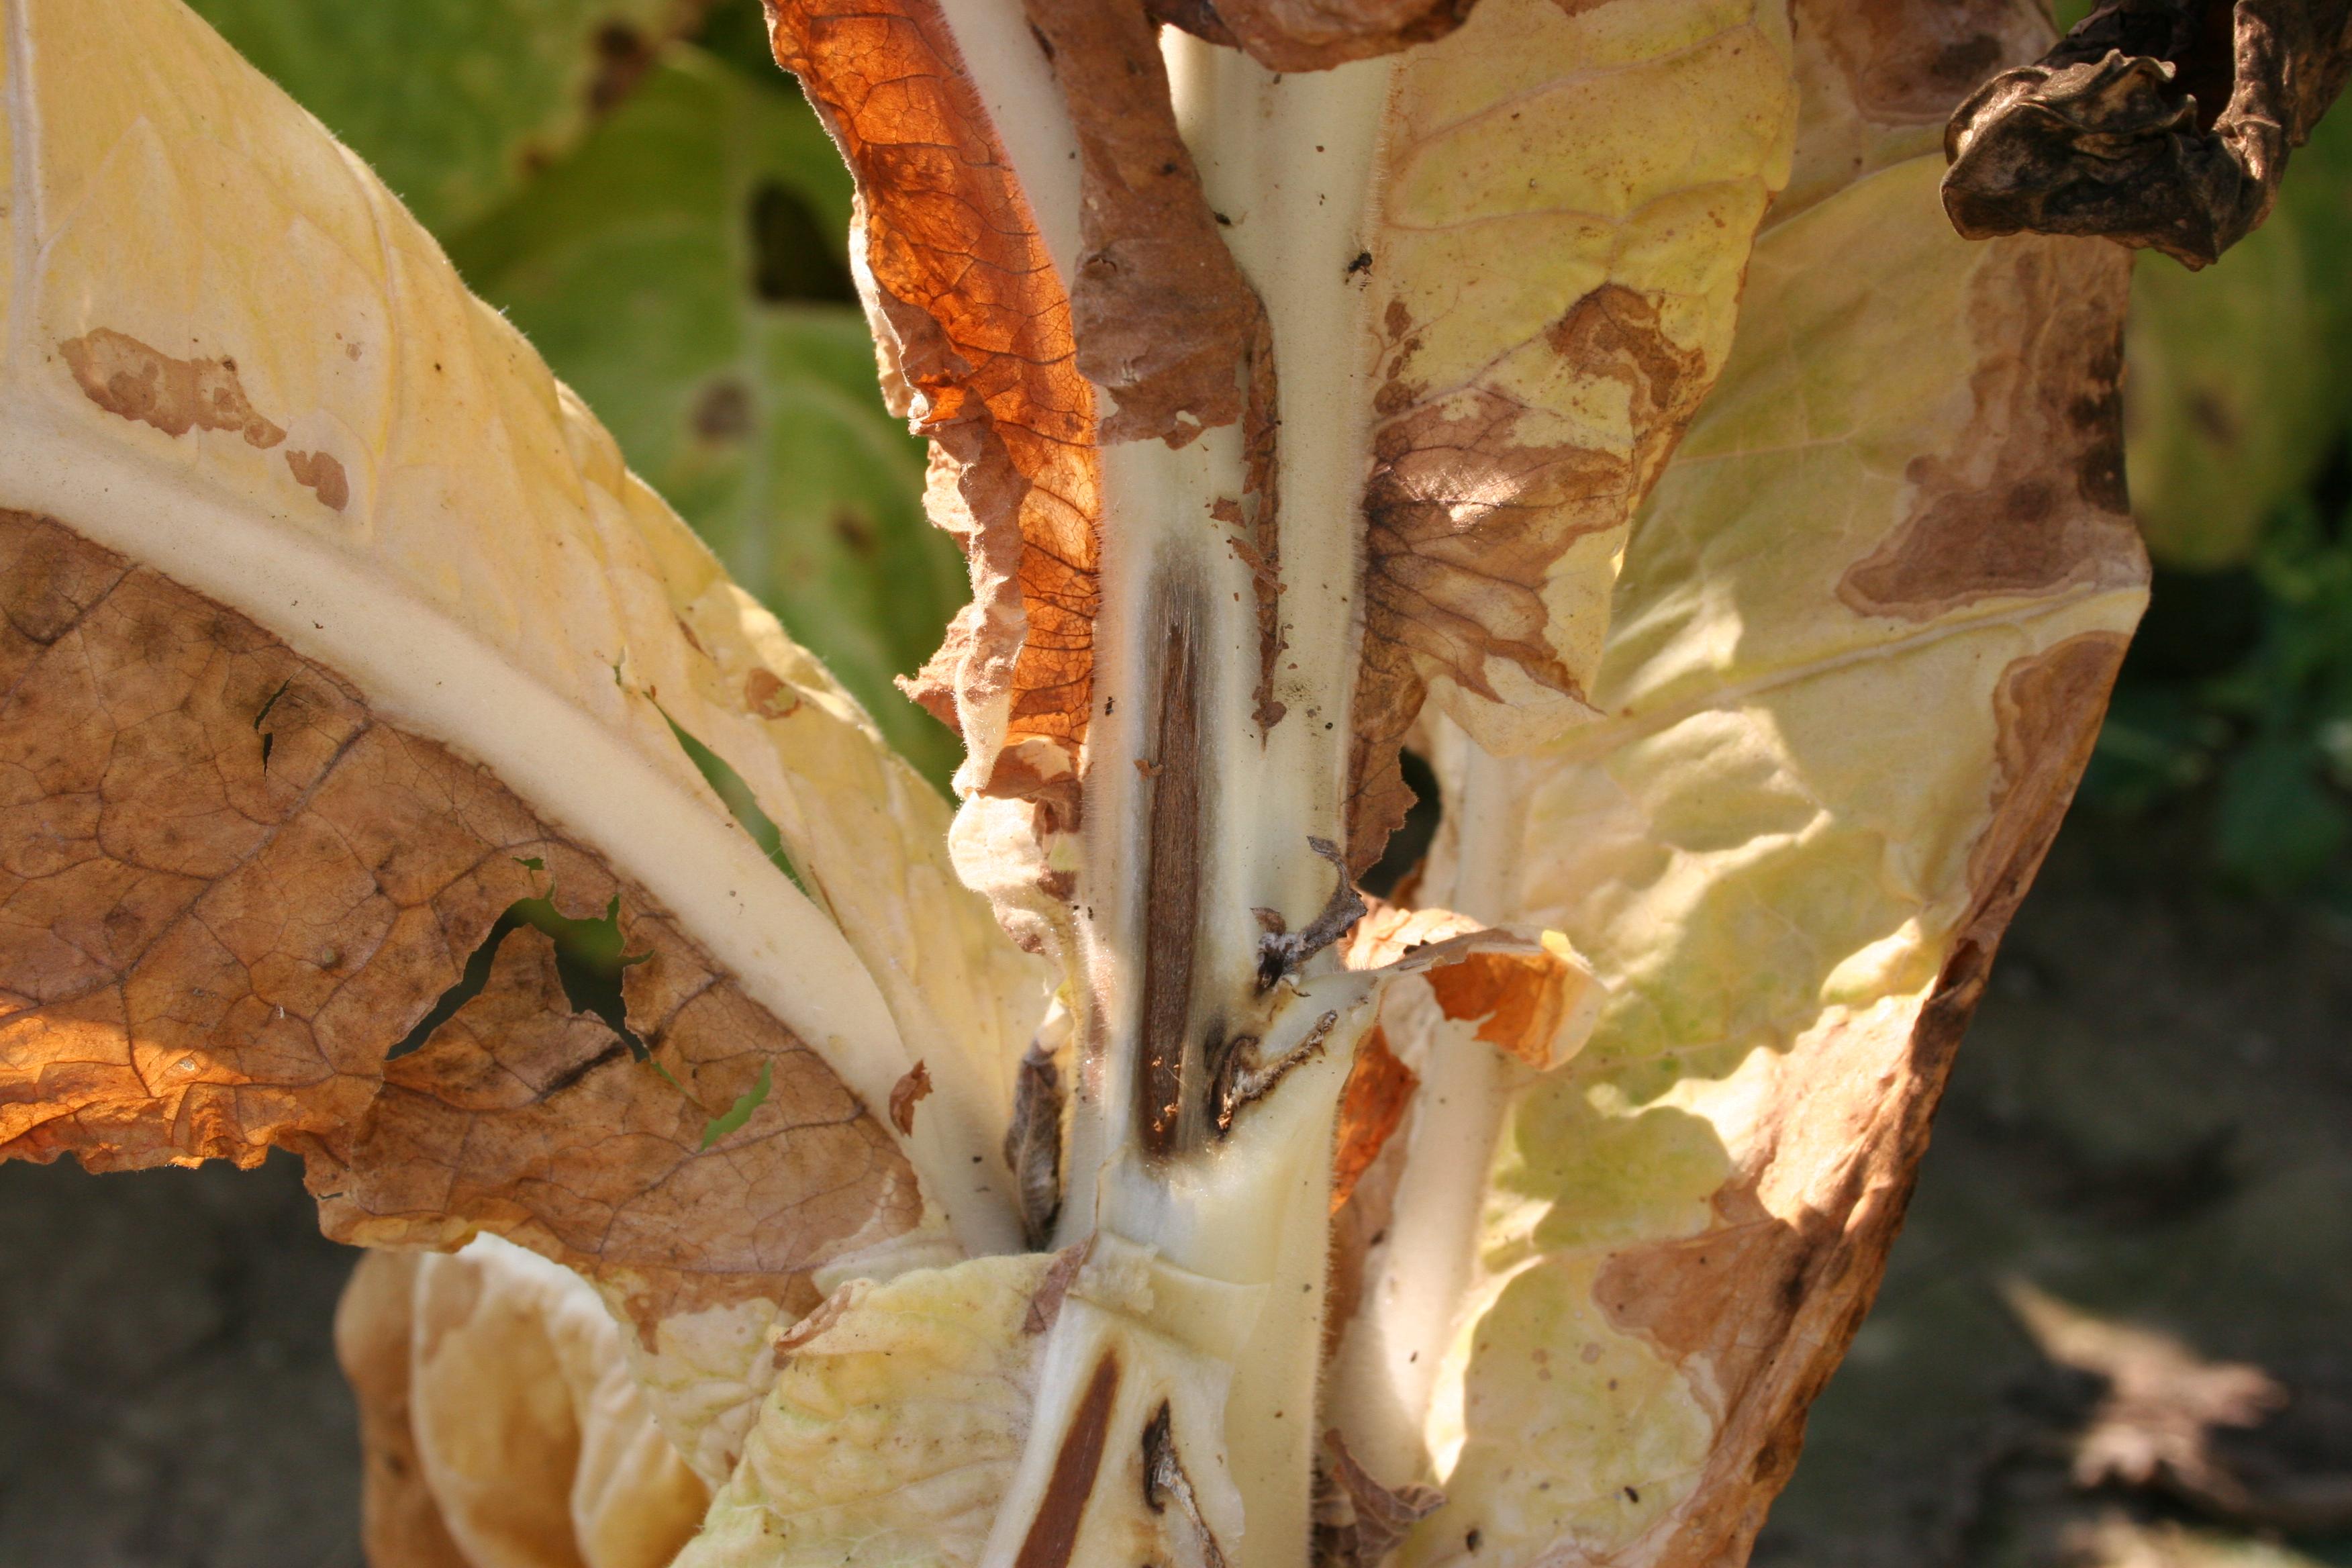 Cutting through the stalk of a tobacco plant with Fusarium wilt will reveal a dark discoloration of the vascular tissue. (Photo: Kenneth Seebold, UK)